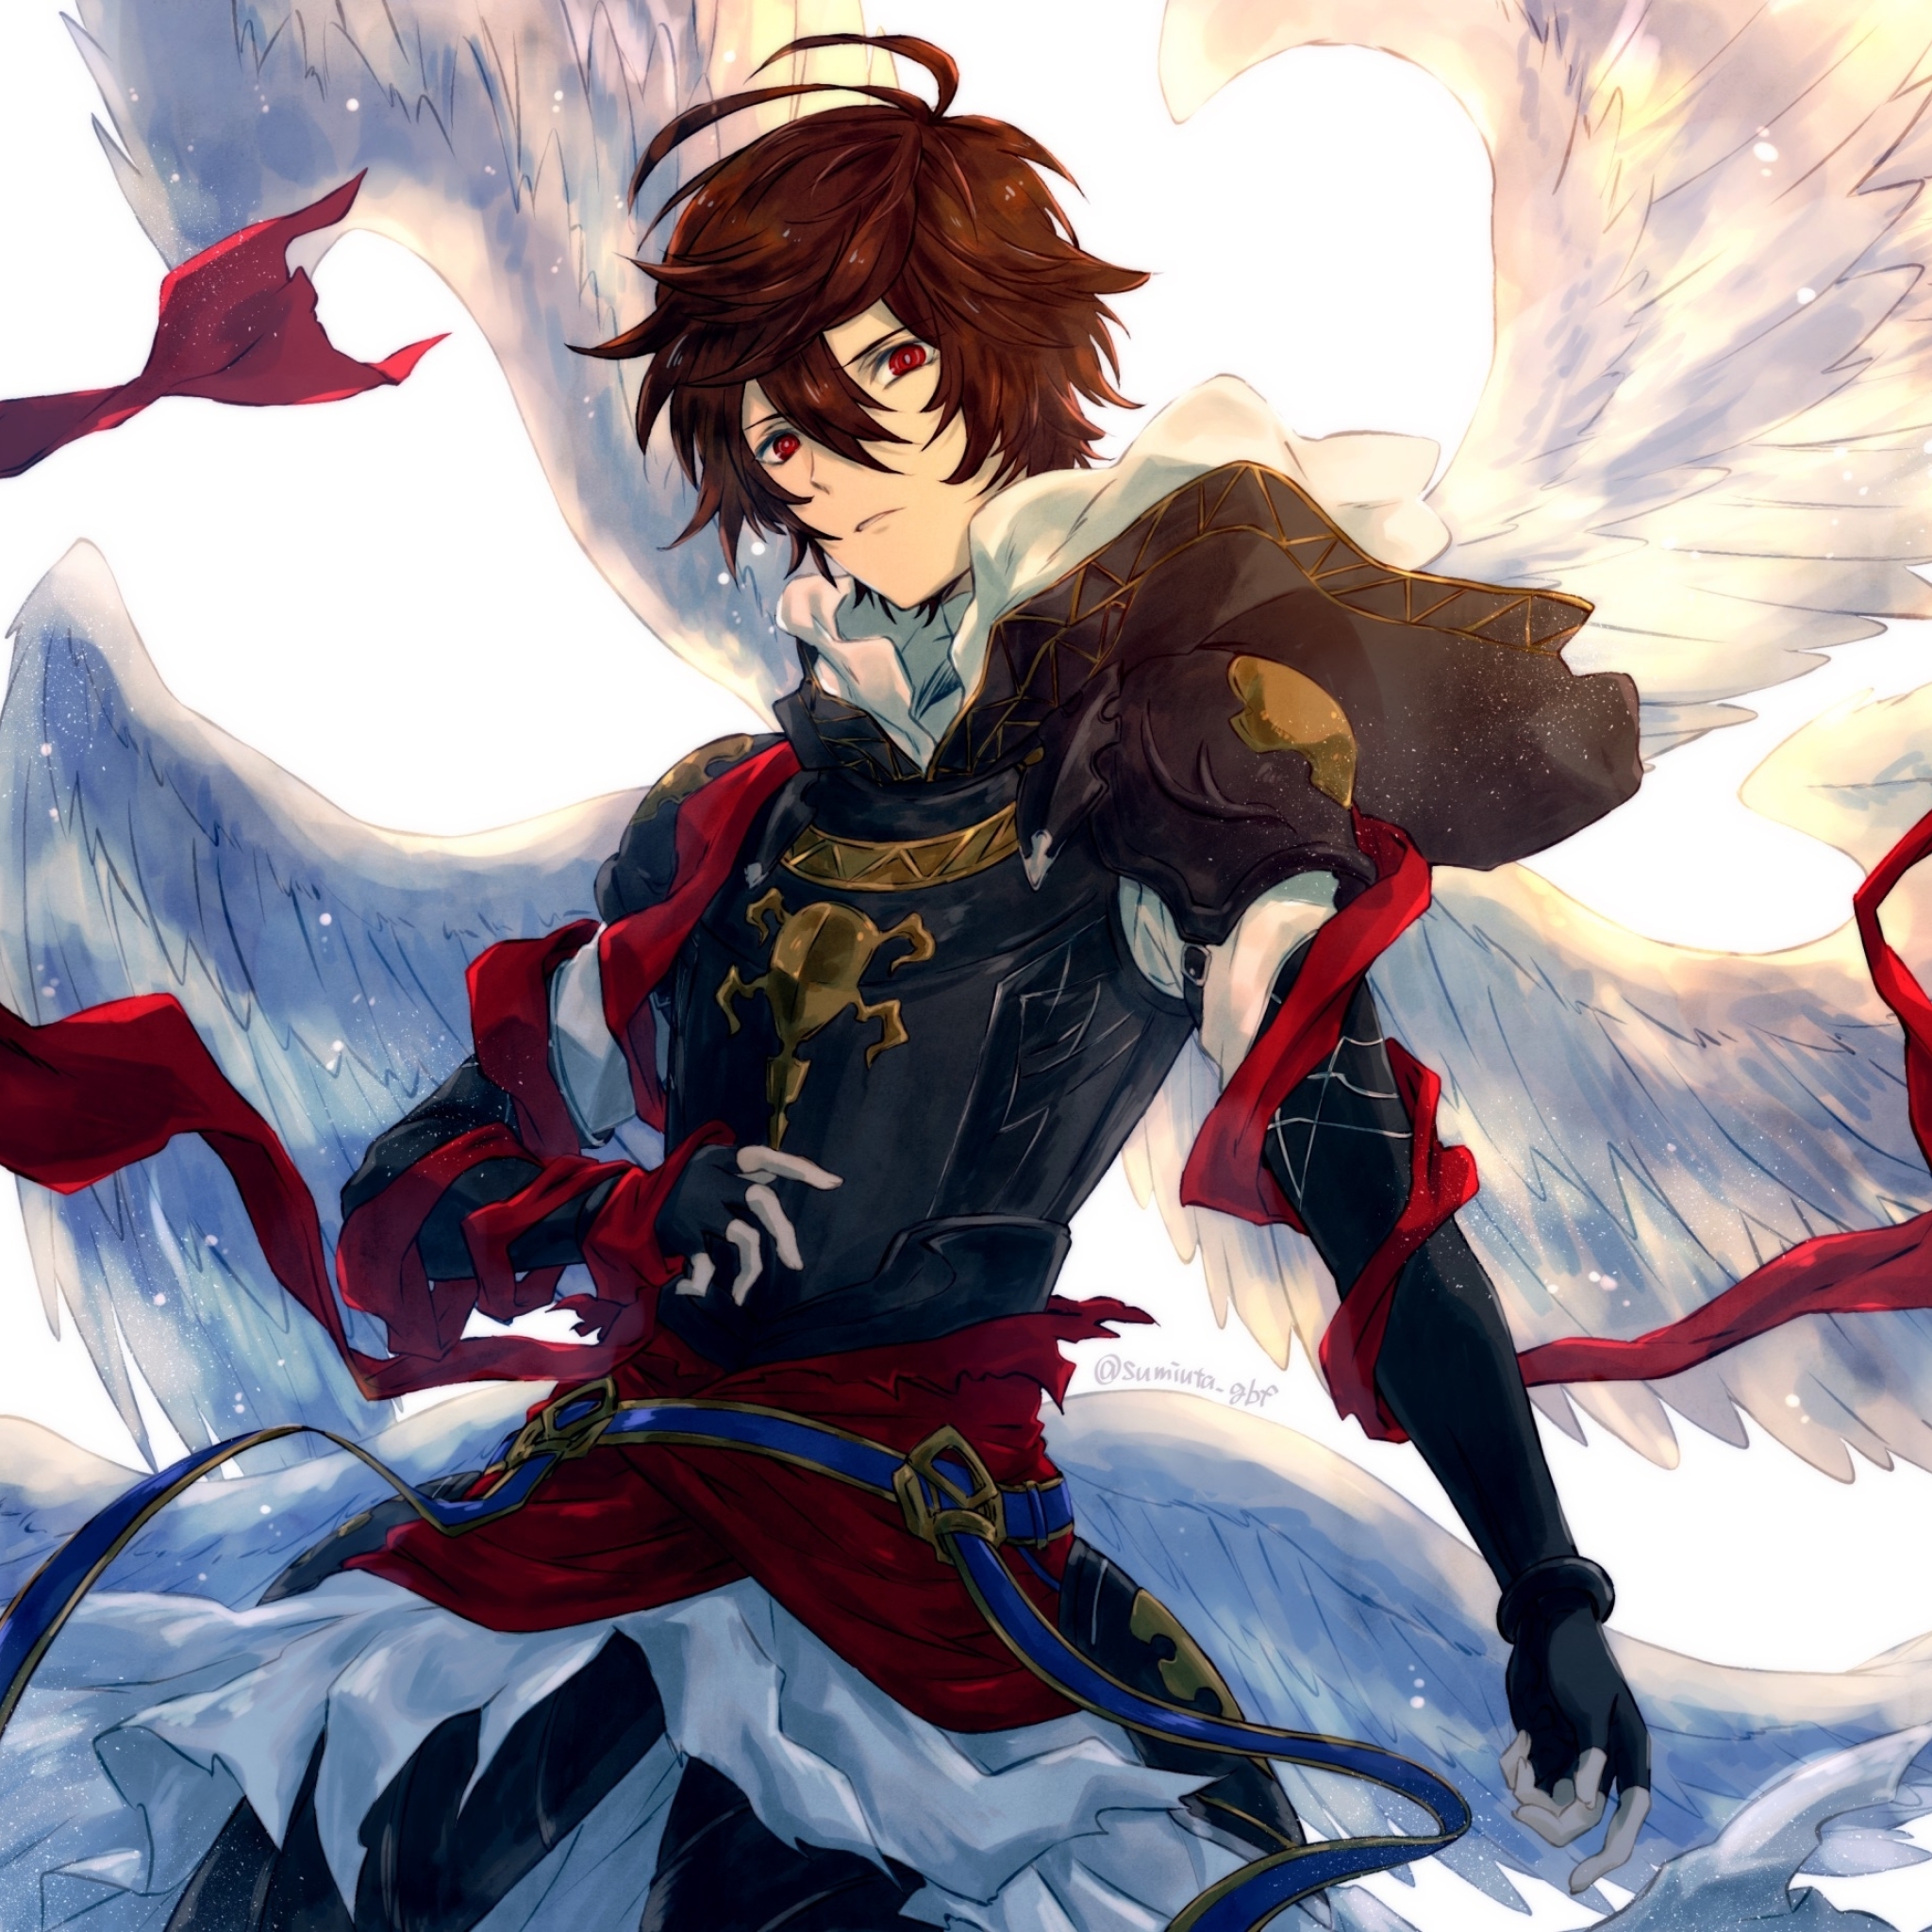 48x48 Sandalphon Granblue Fantasy Ipad Air Wallpaper Hd Anime 4k Wallpapers Images Photos And Background